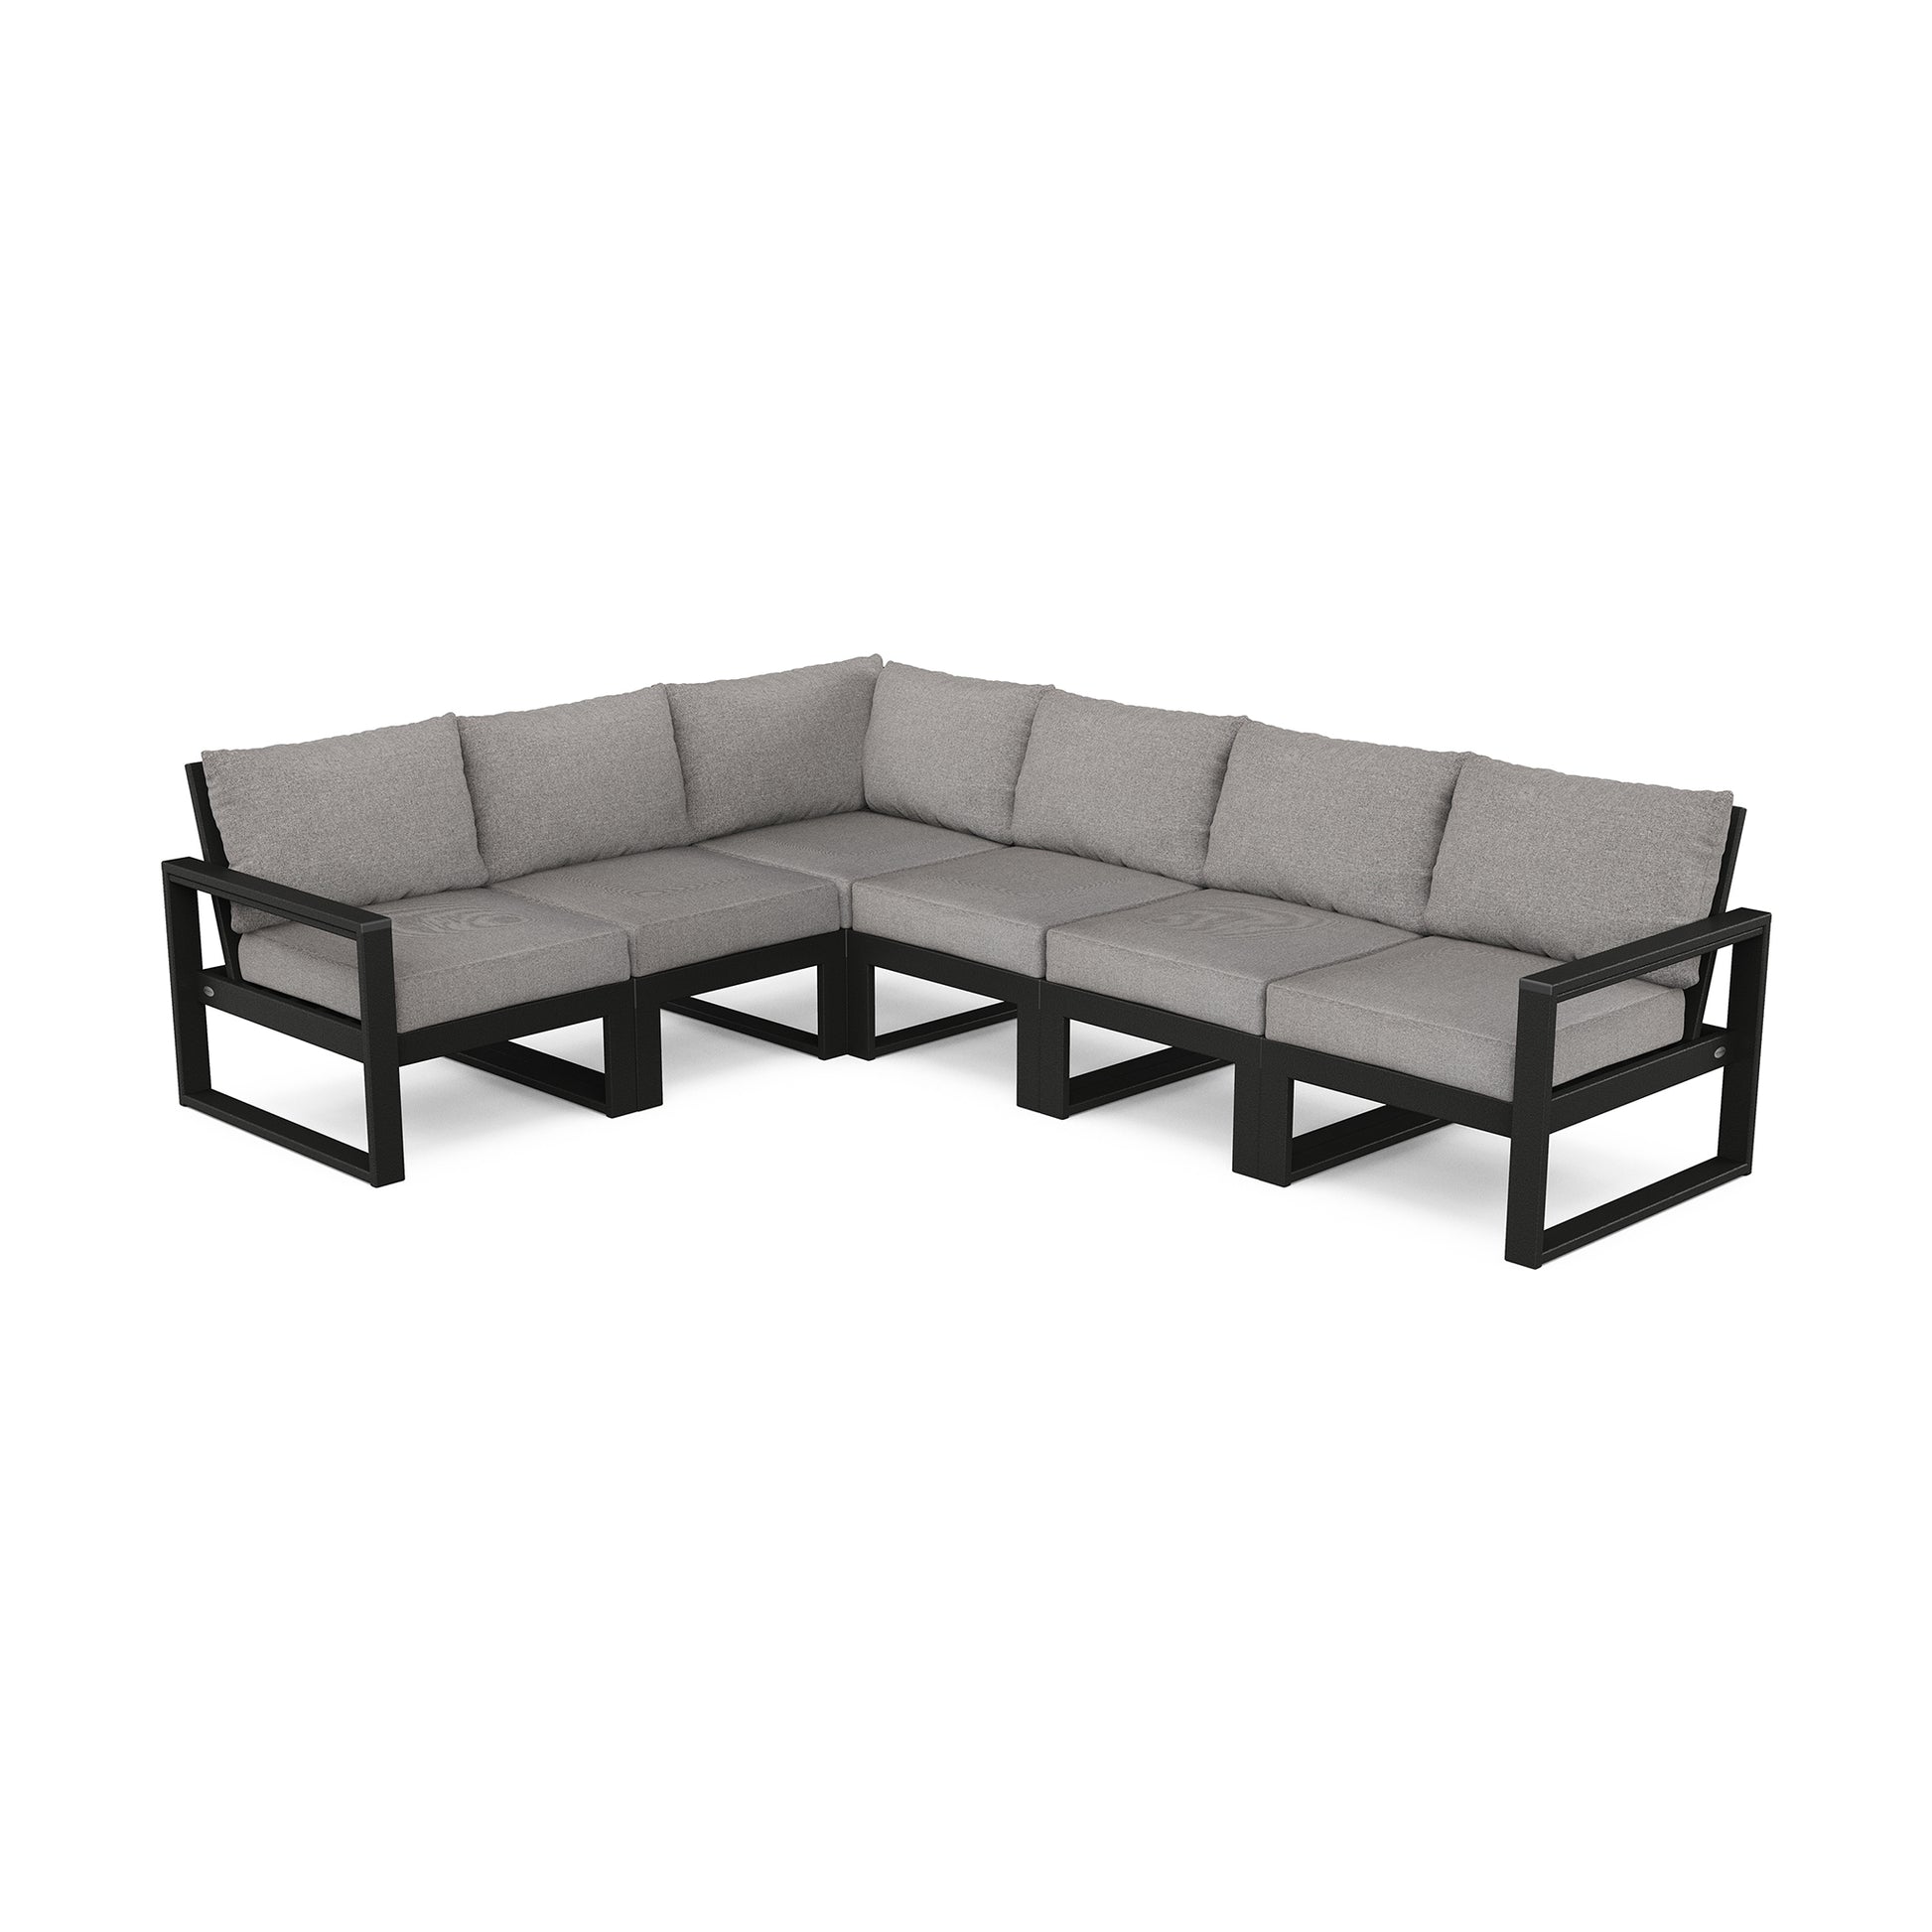 A modern l-shaped POLYWOOD® EDGE 6-Piece Modular Deep Seating Set outdoor sectional sofa with a matte black frame and gray cushions, isolated on a white background.